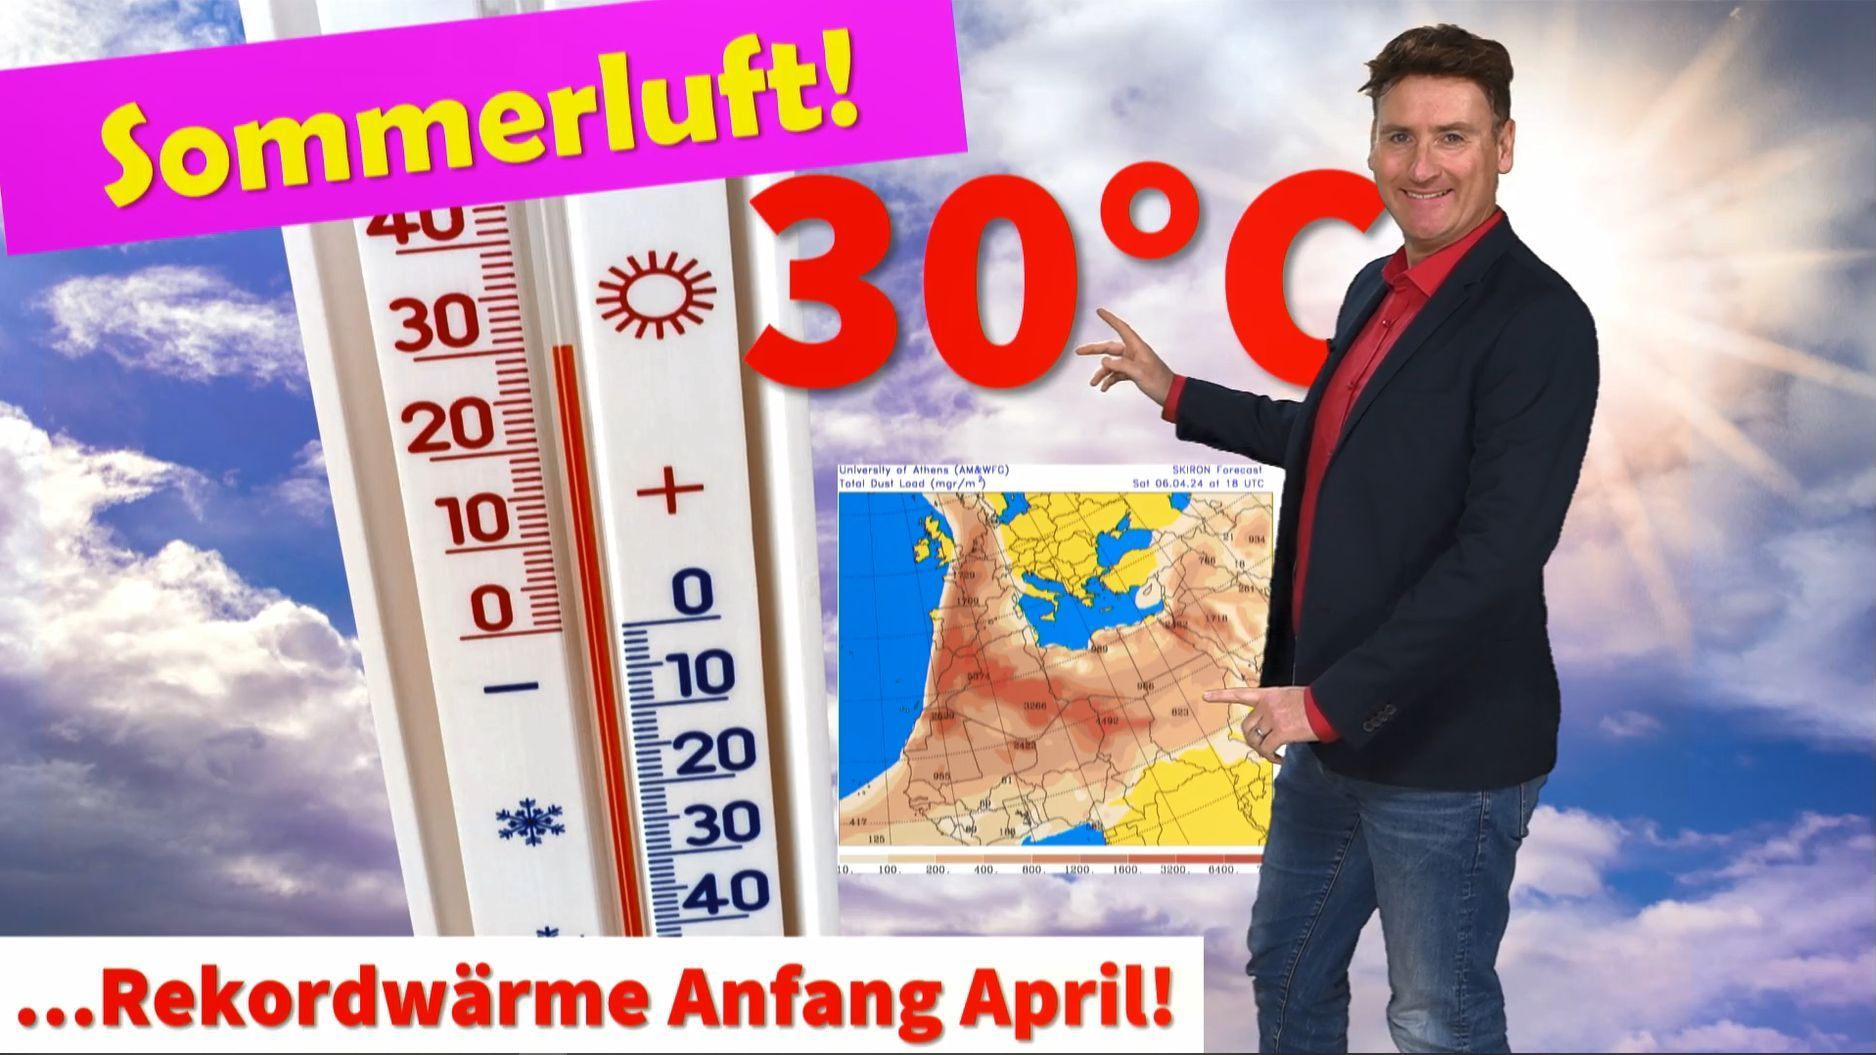 Up to 30°C on Saturday! The first weekend in April will be the hottest ever in Germany!